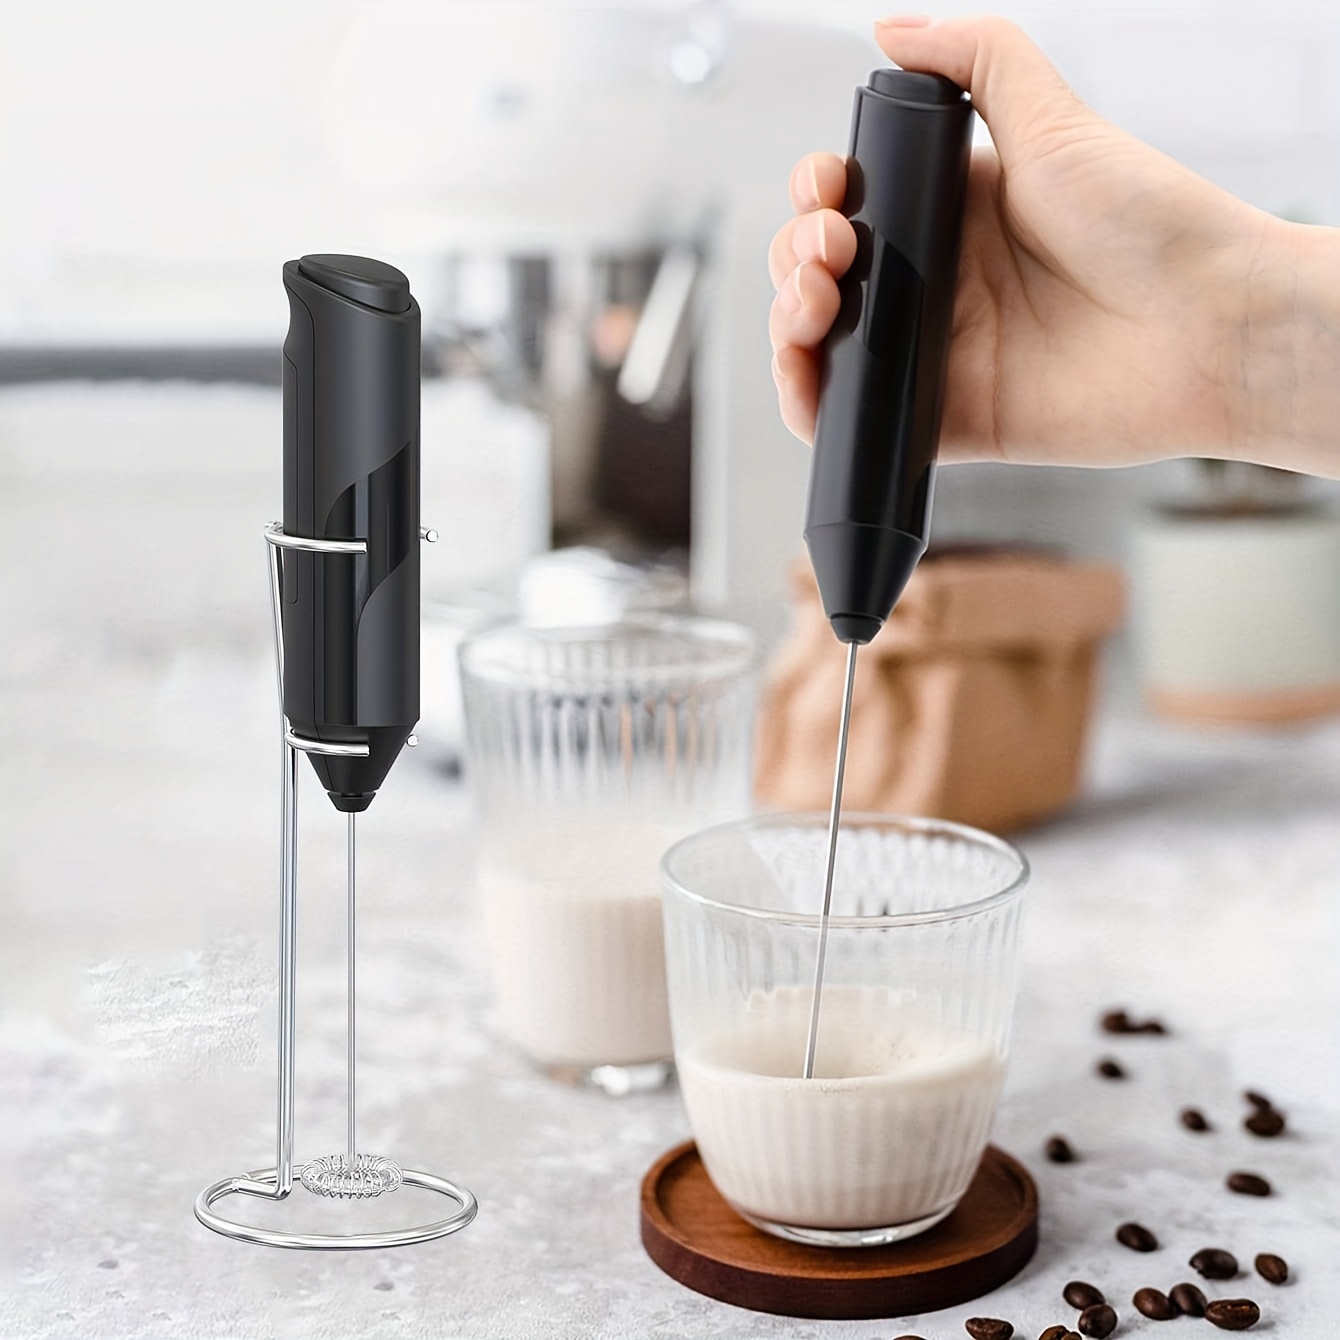 Milk Frother - 4 in 1 Detachable Milk Frother and Steamer, 13.5oz